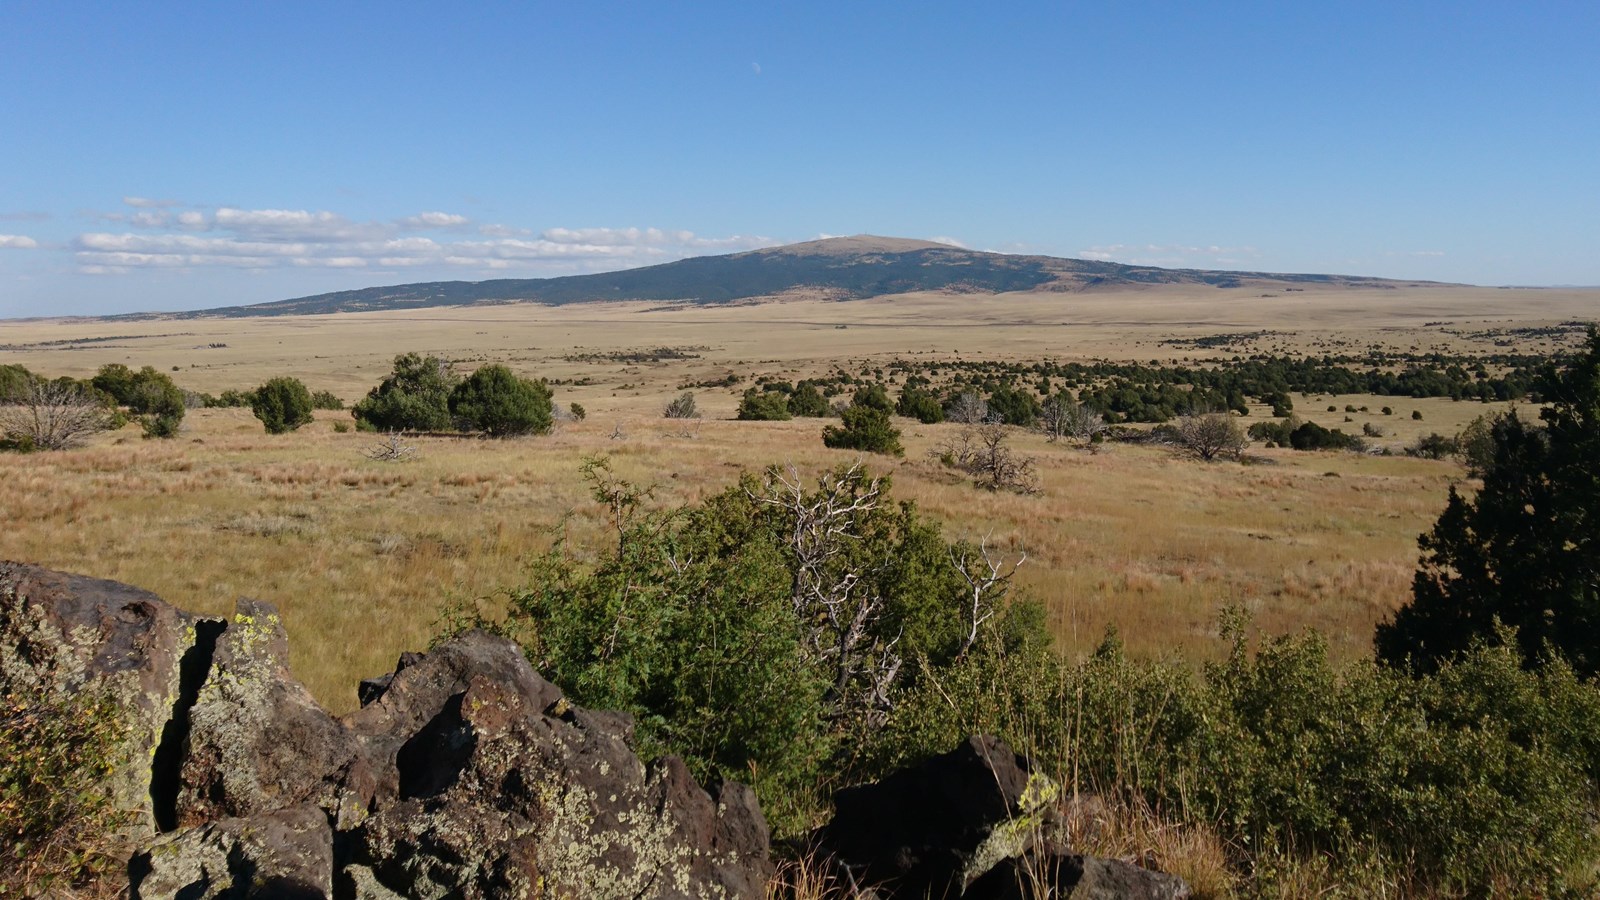 View of Sierra Grande Volcano in the distance behind a sea of prairie grass